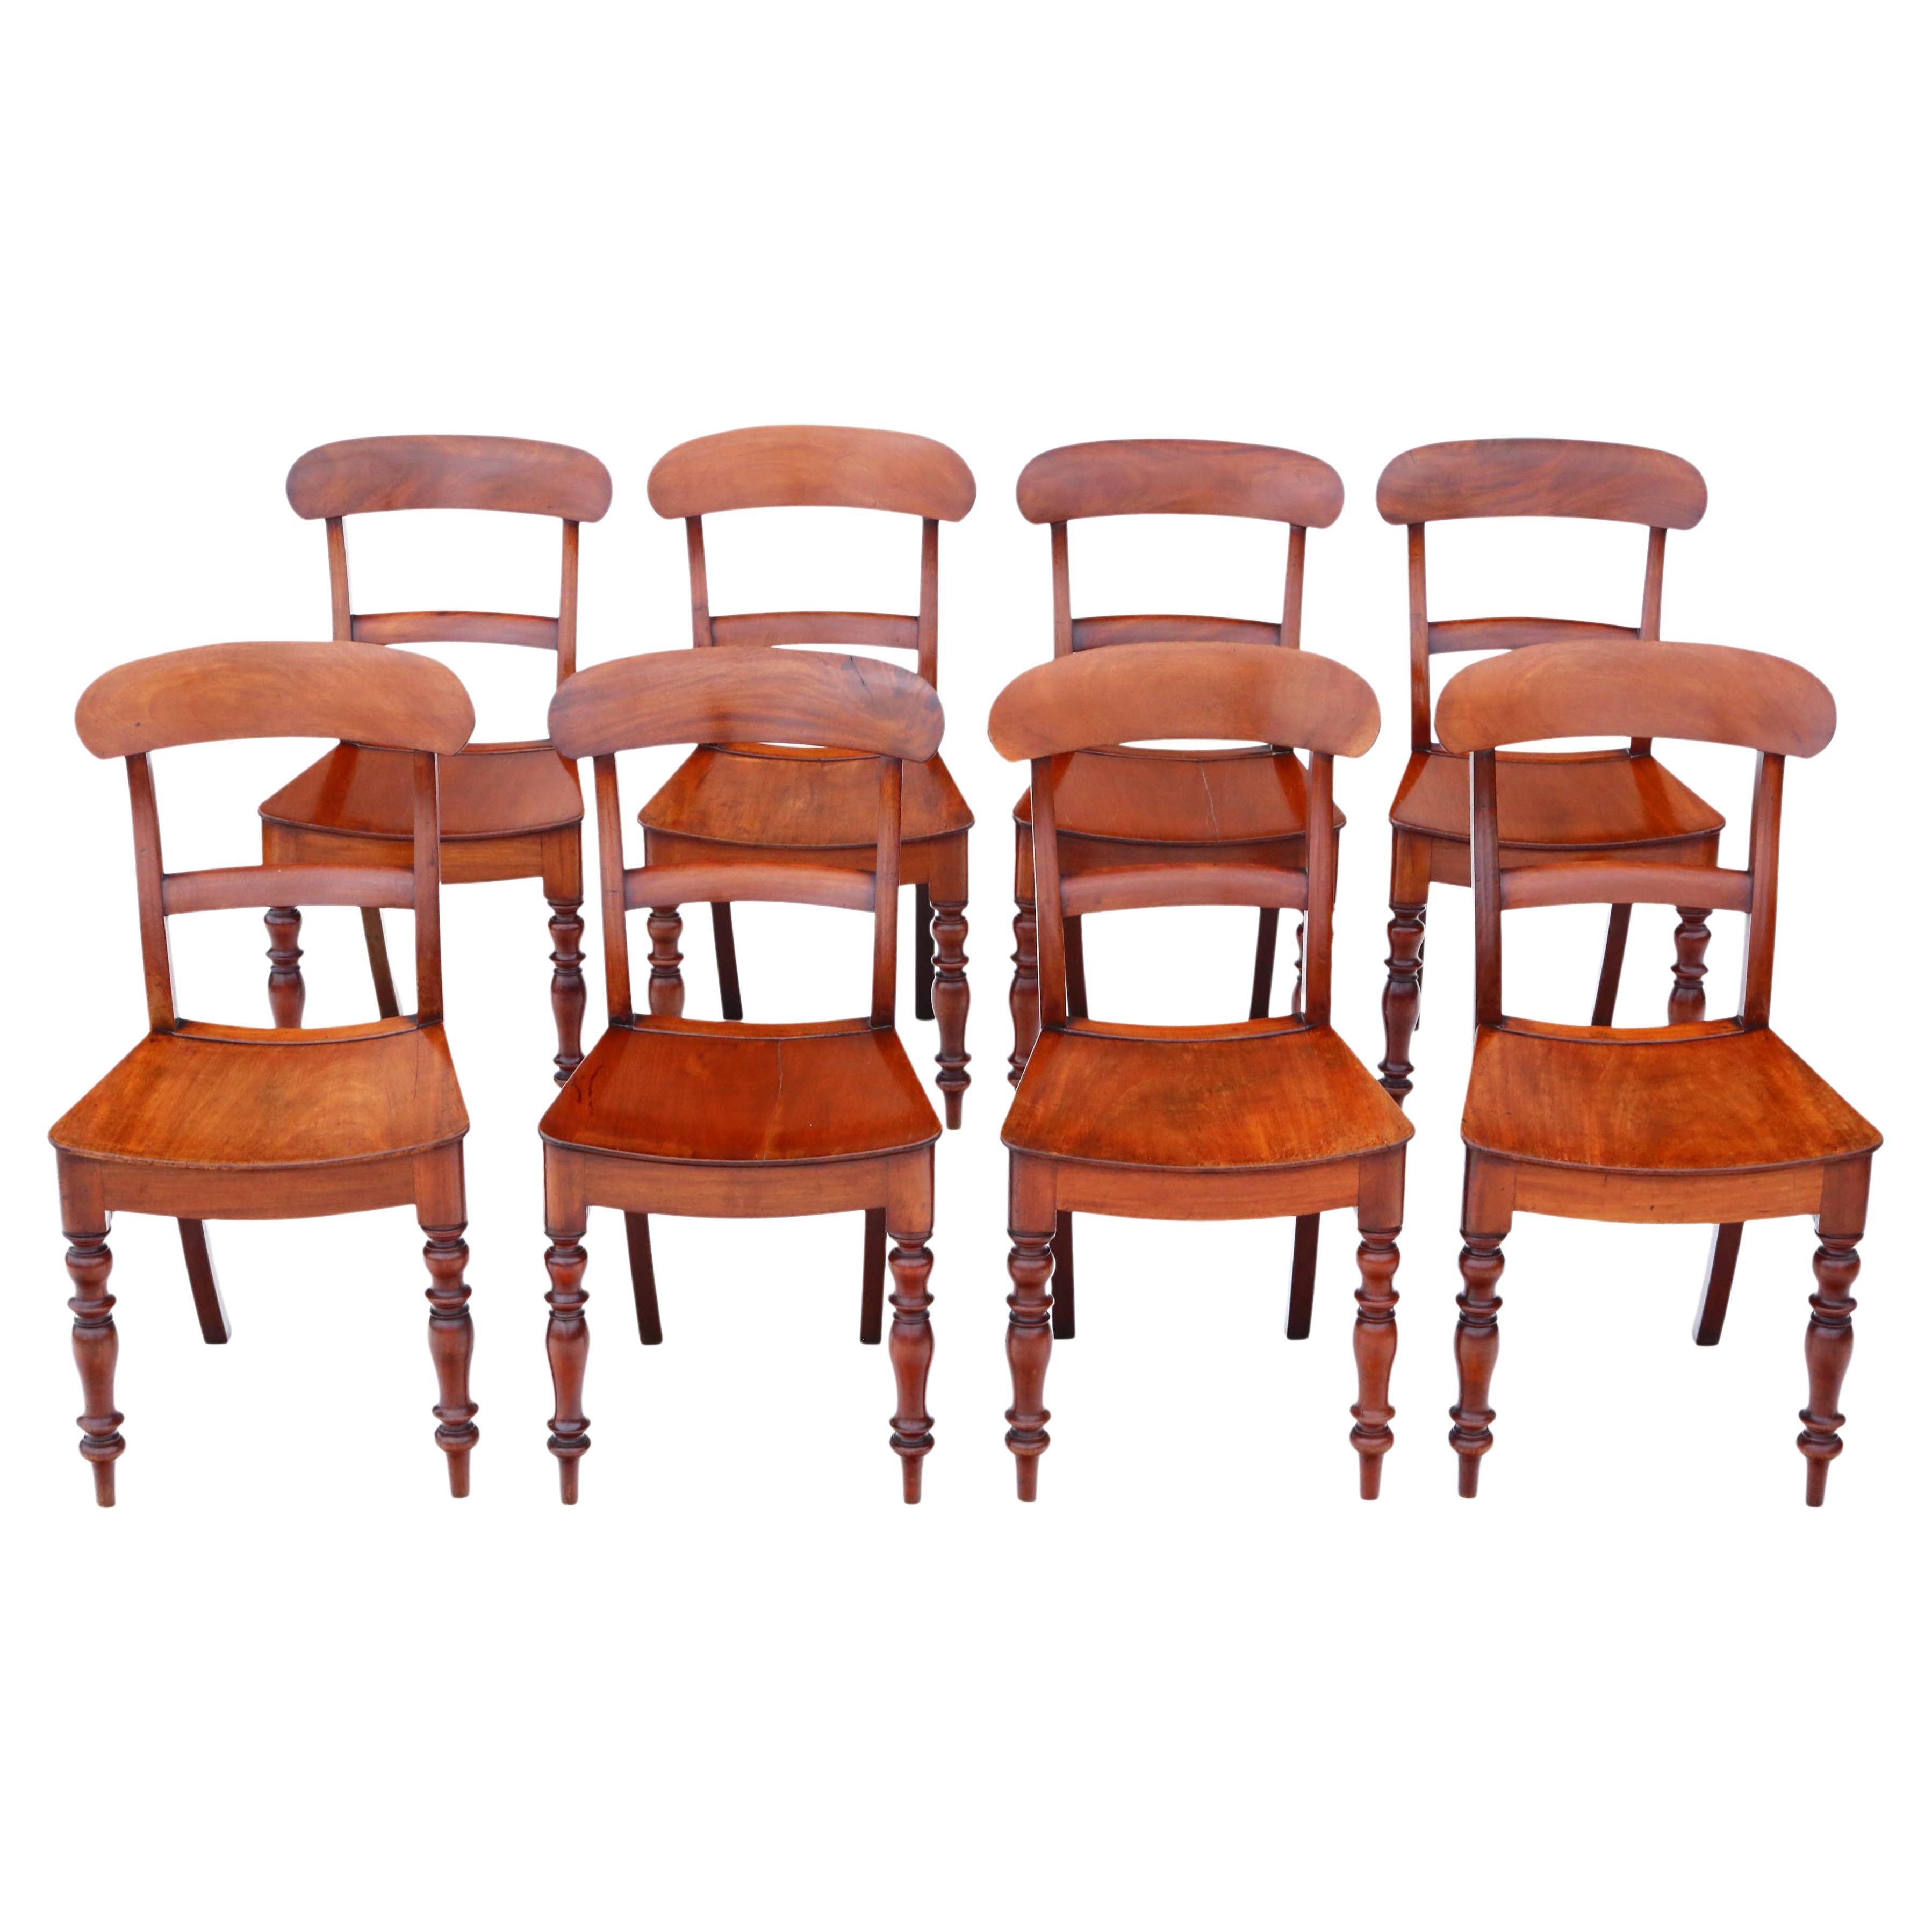 Antique Matched Set of 8 Mahogany Kitchen Dining Chairs, 19th Century